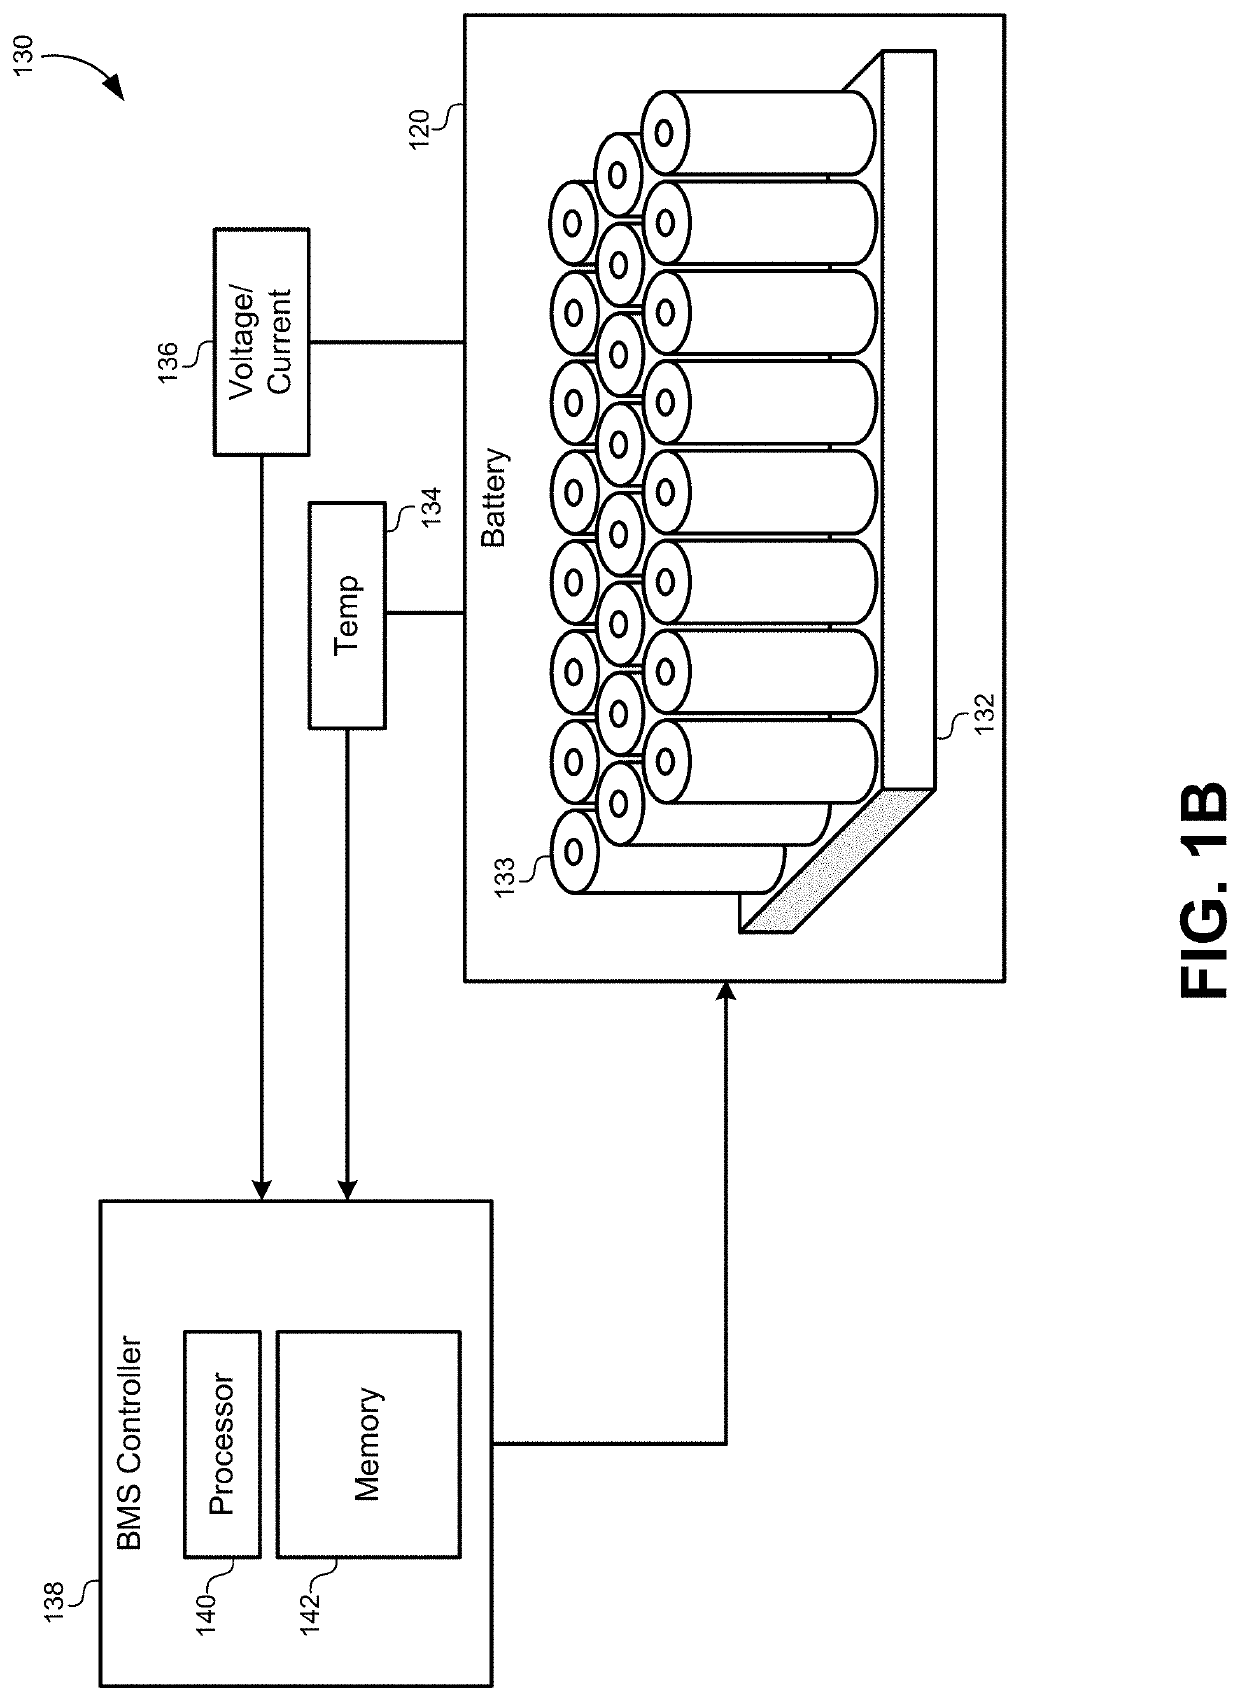 Battery cell design with a non-invasive lithium reference lead